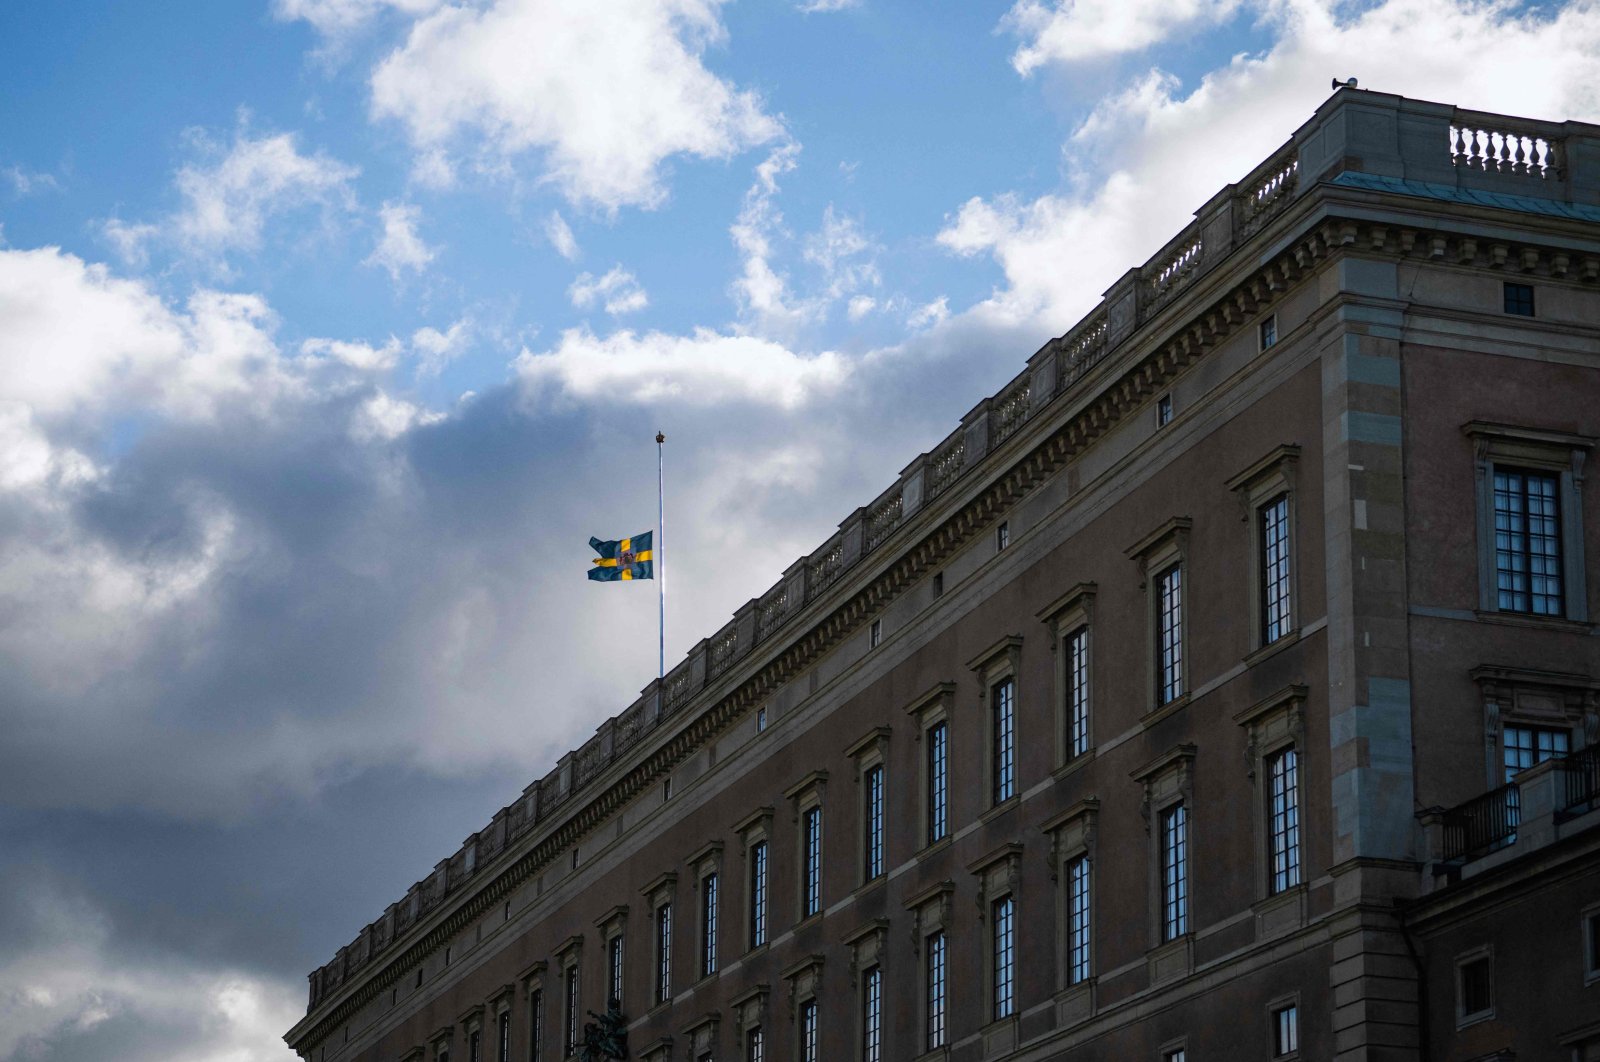 The Swedish flag flies at half-mast atop the Royal Palace in Stockholm, Sweden, Sept. 9, 2022. (AFP Photo)